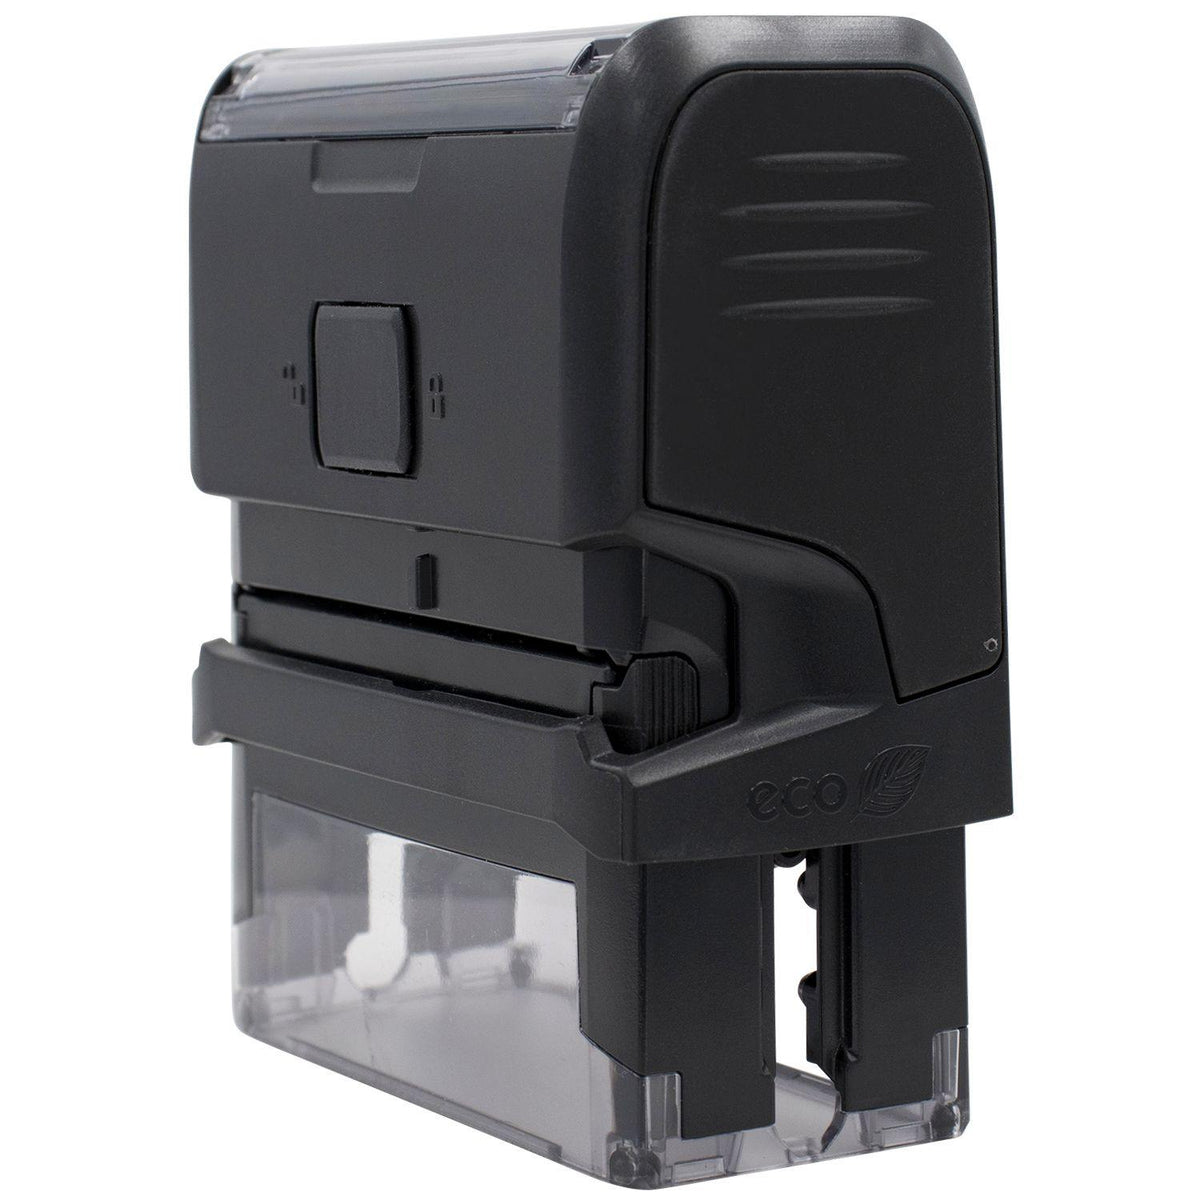 Self-Inking Bold File Stamp - Engineer Seal Stamps - Brand_Trodat, Impression Size_Small, Stamp Type_Self-Inking Stamp, Type of Use_General, Type of Use_Office